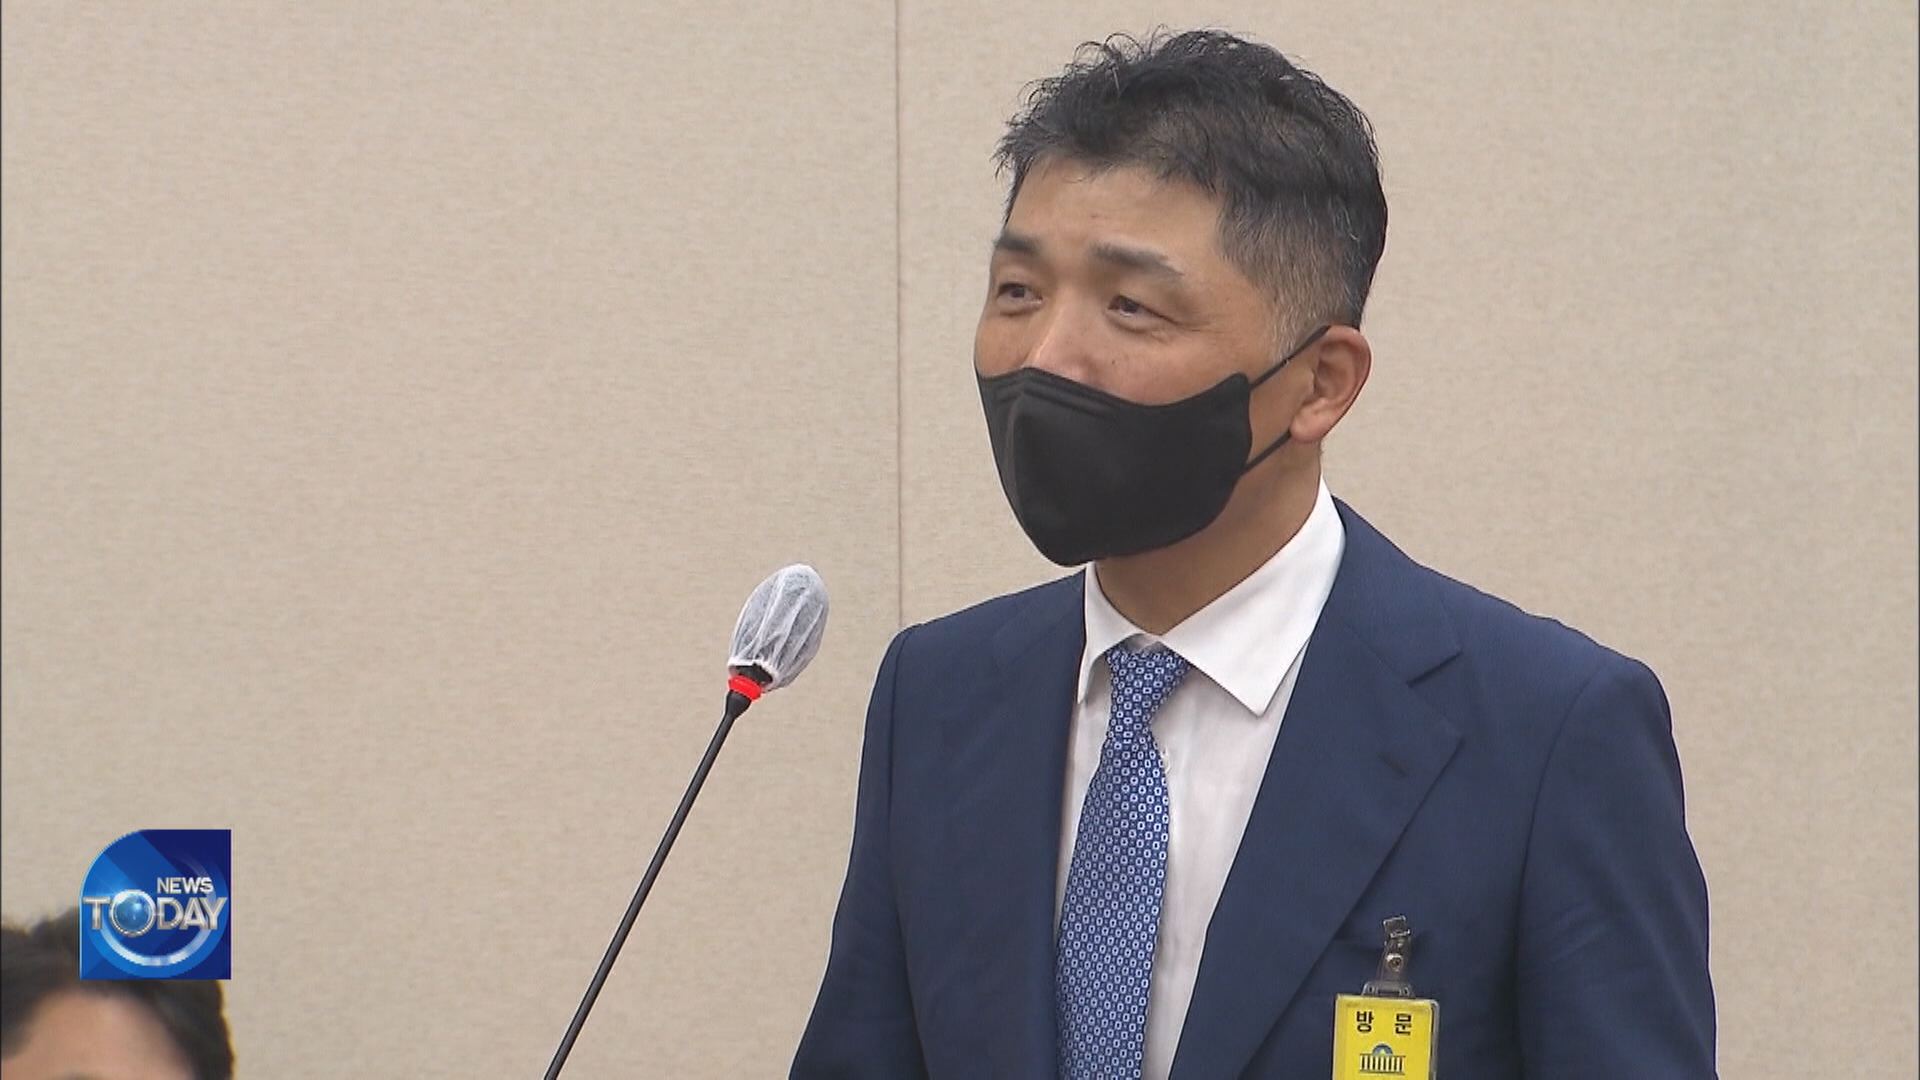 KAKAO HEAD QUESTIONED DURING STATE AUDIT